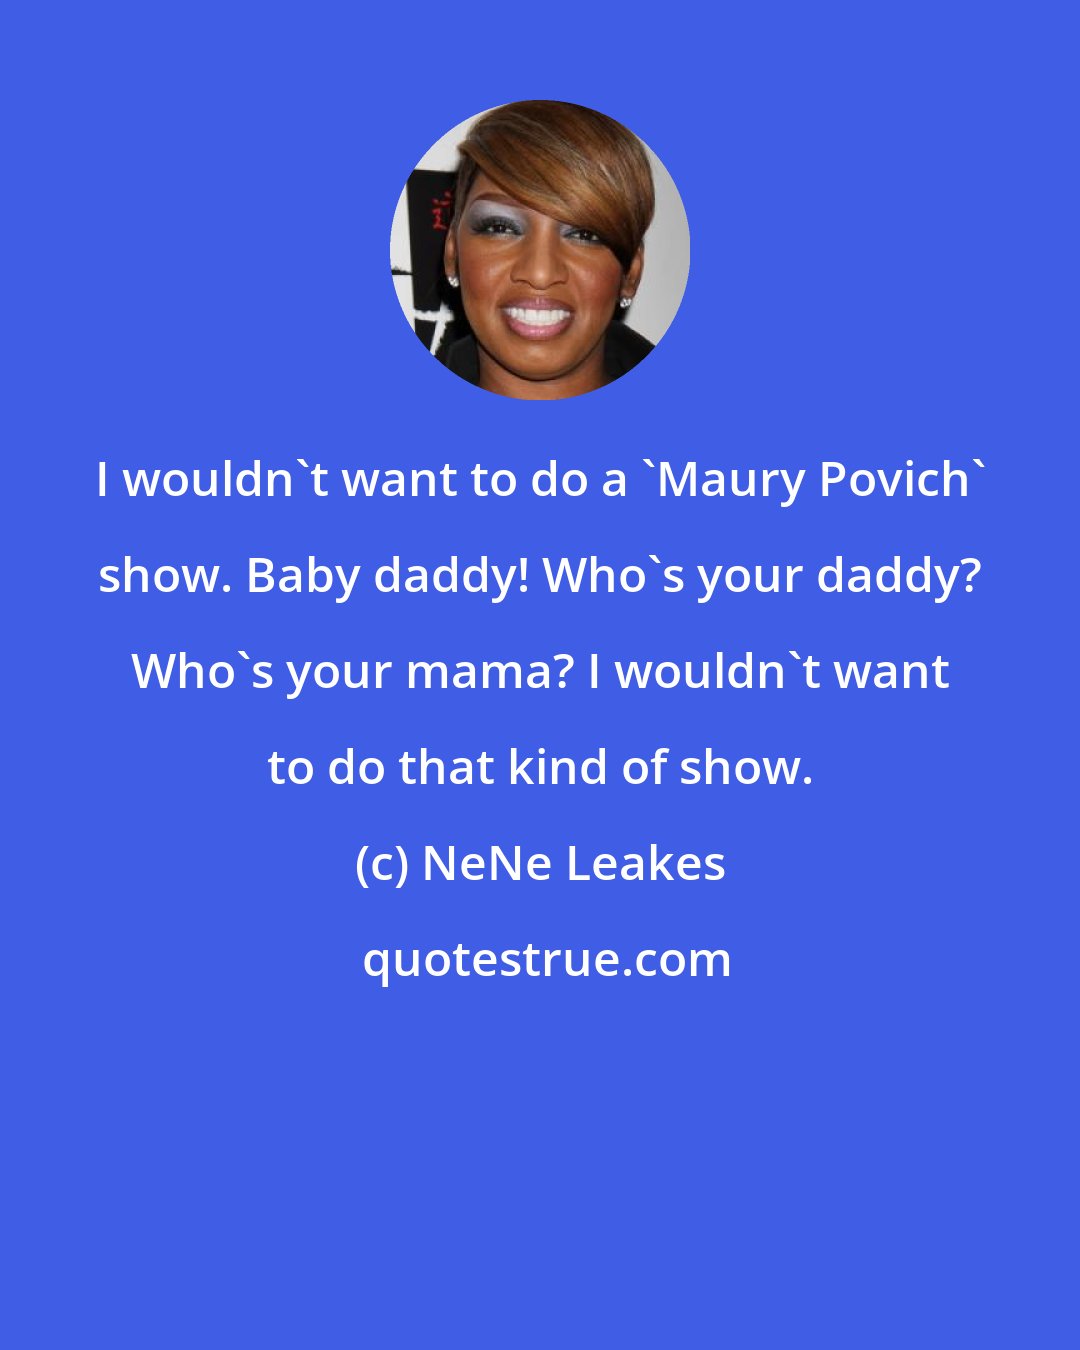 NeNe Leakes: I wouldn't want to do a 'Maury Povich' show. Baby daddy! Who's your daddy? Who's your mama? I wouldn't want to do that kind of show.